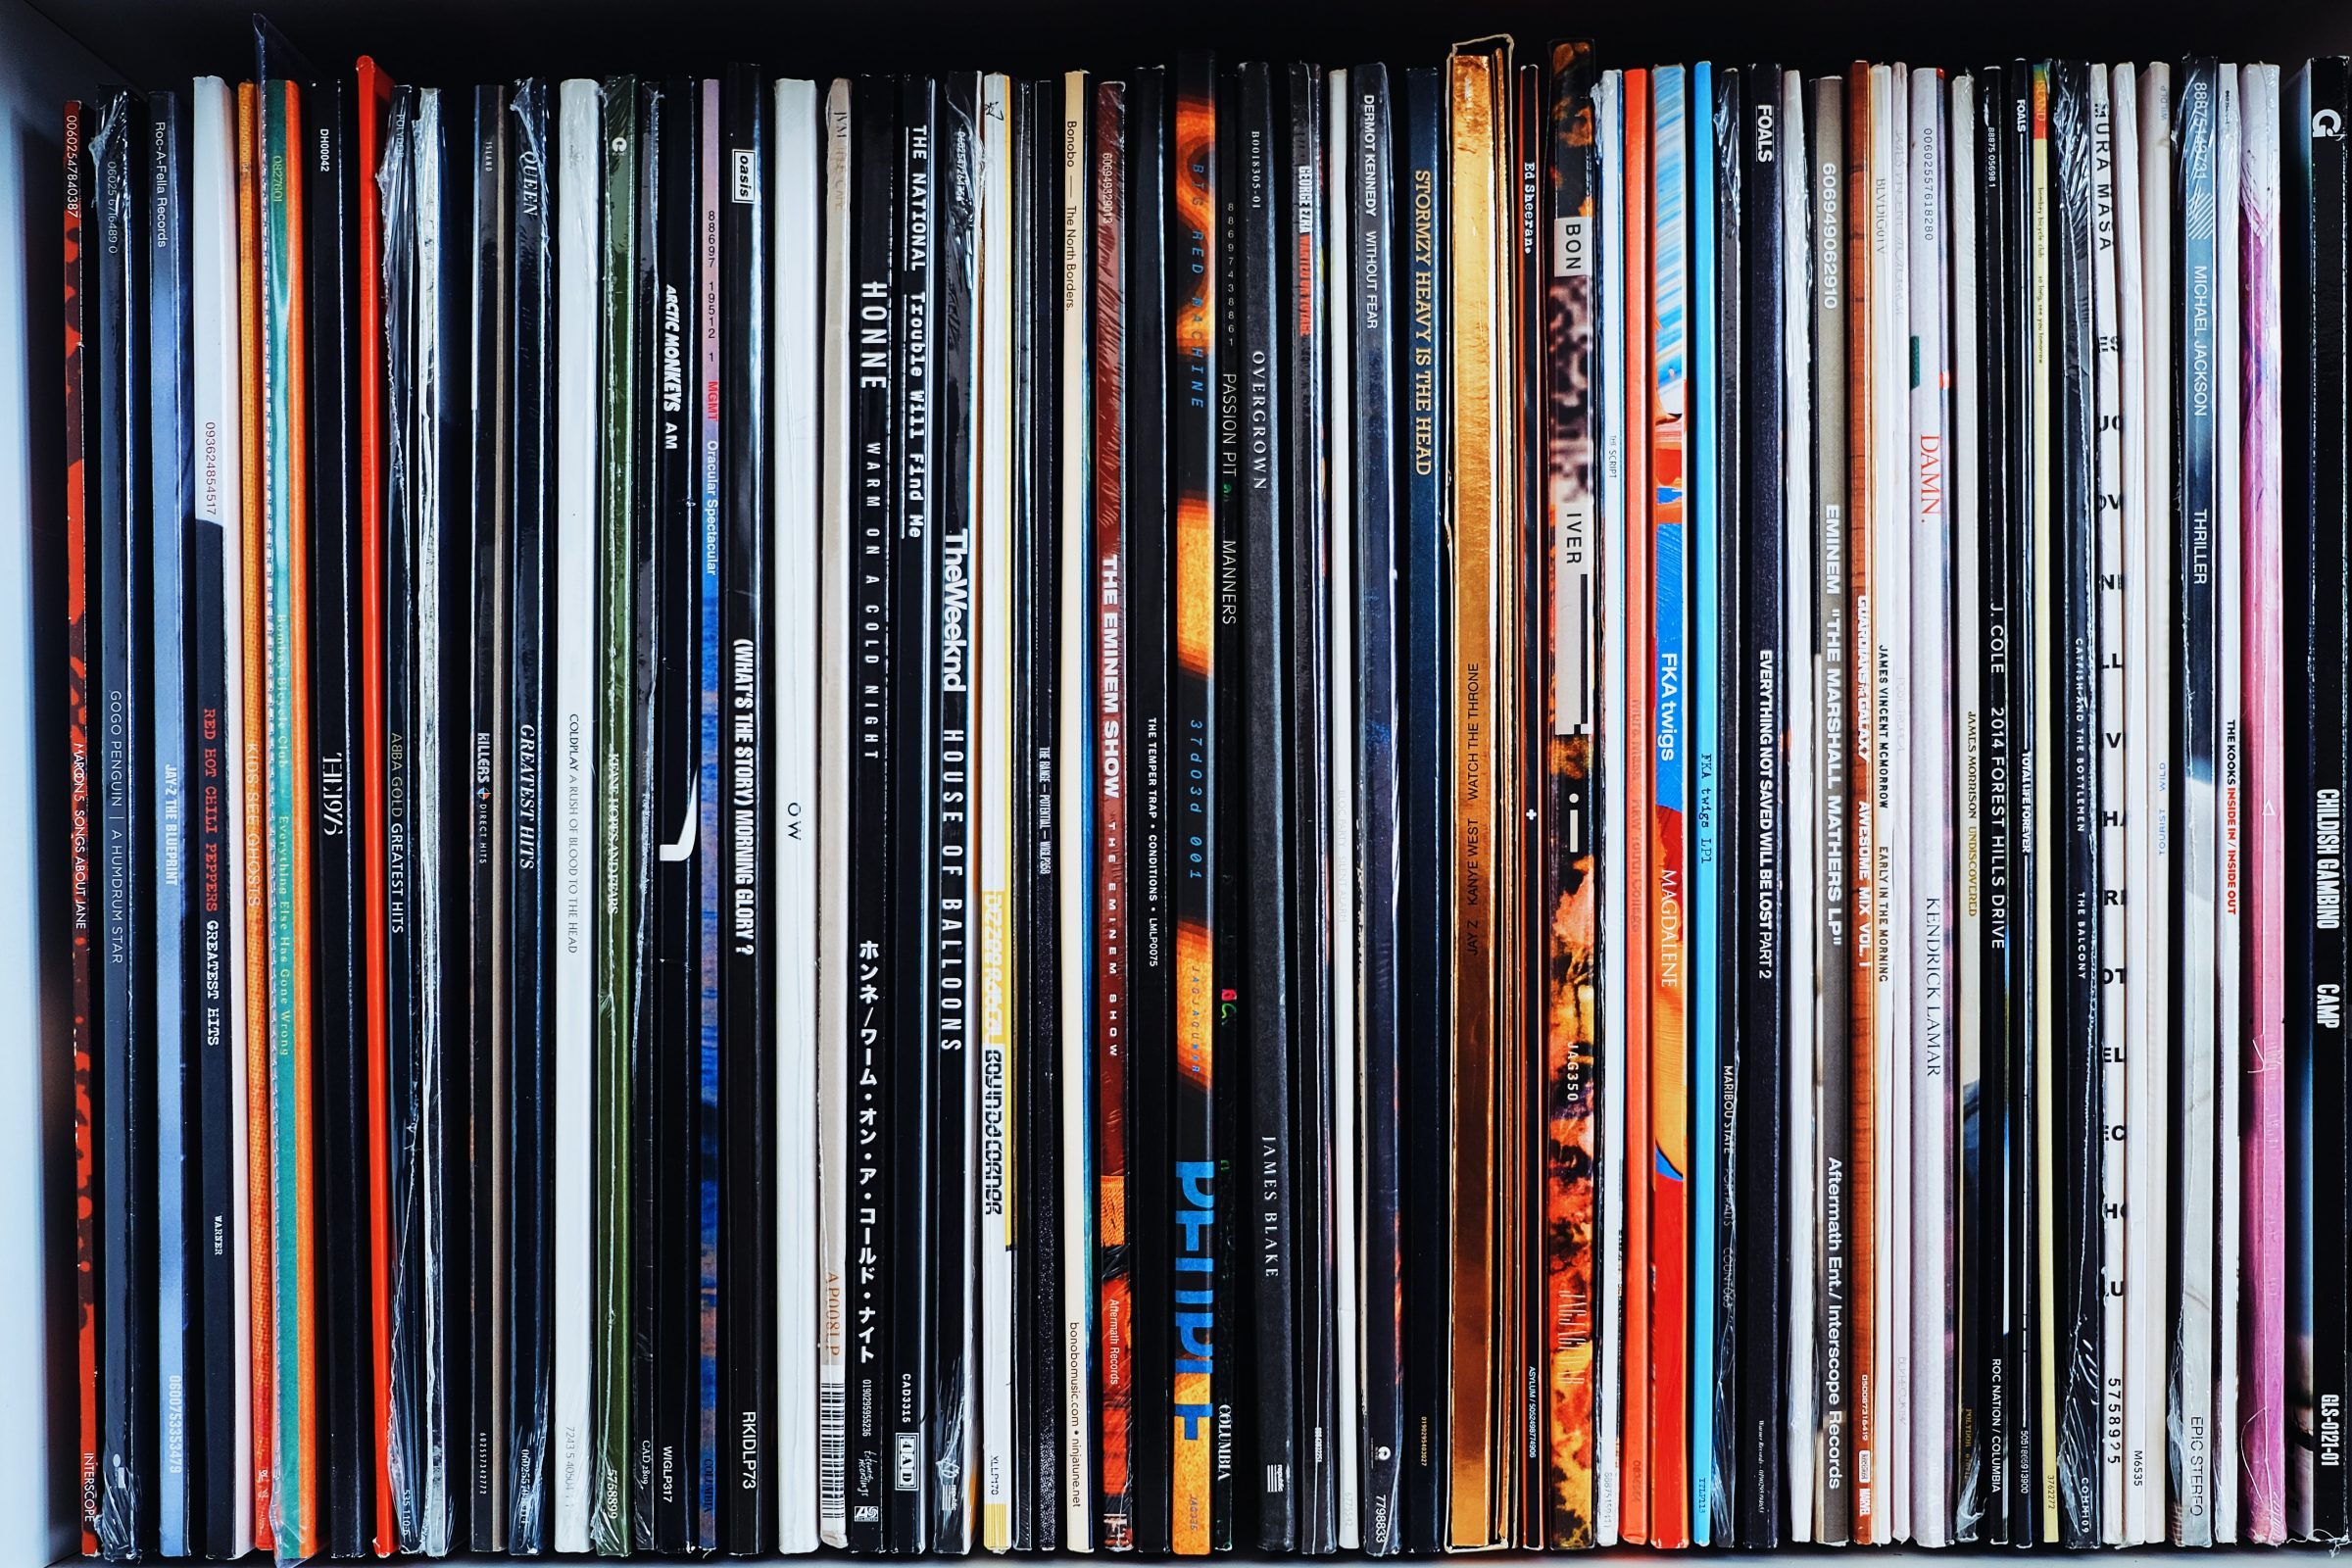 Why You Should Properly Look After Your Vinyl Collection